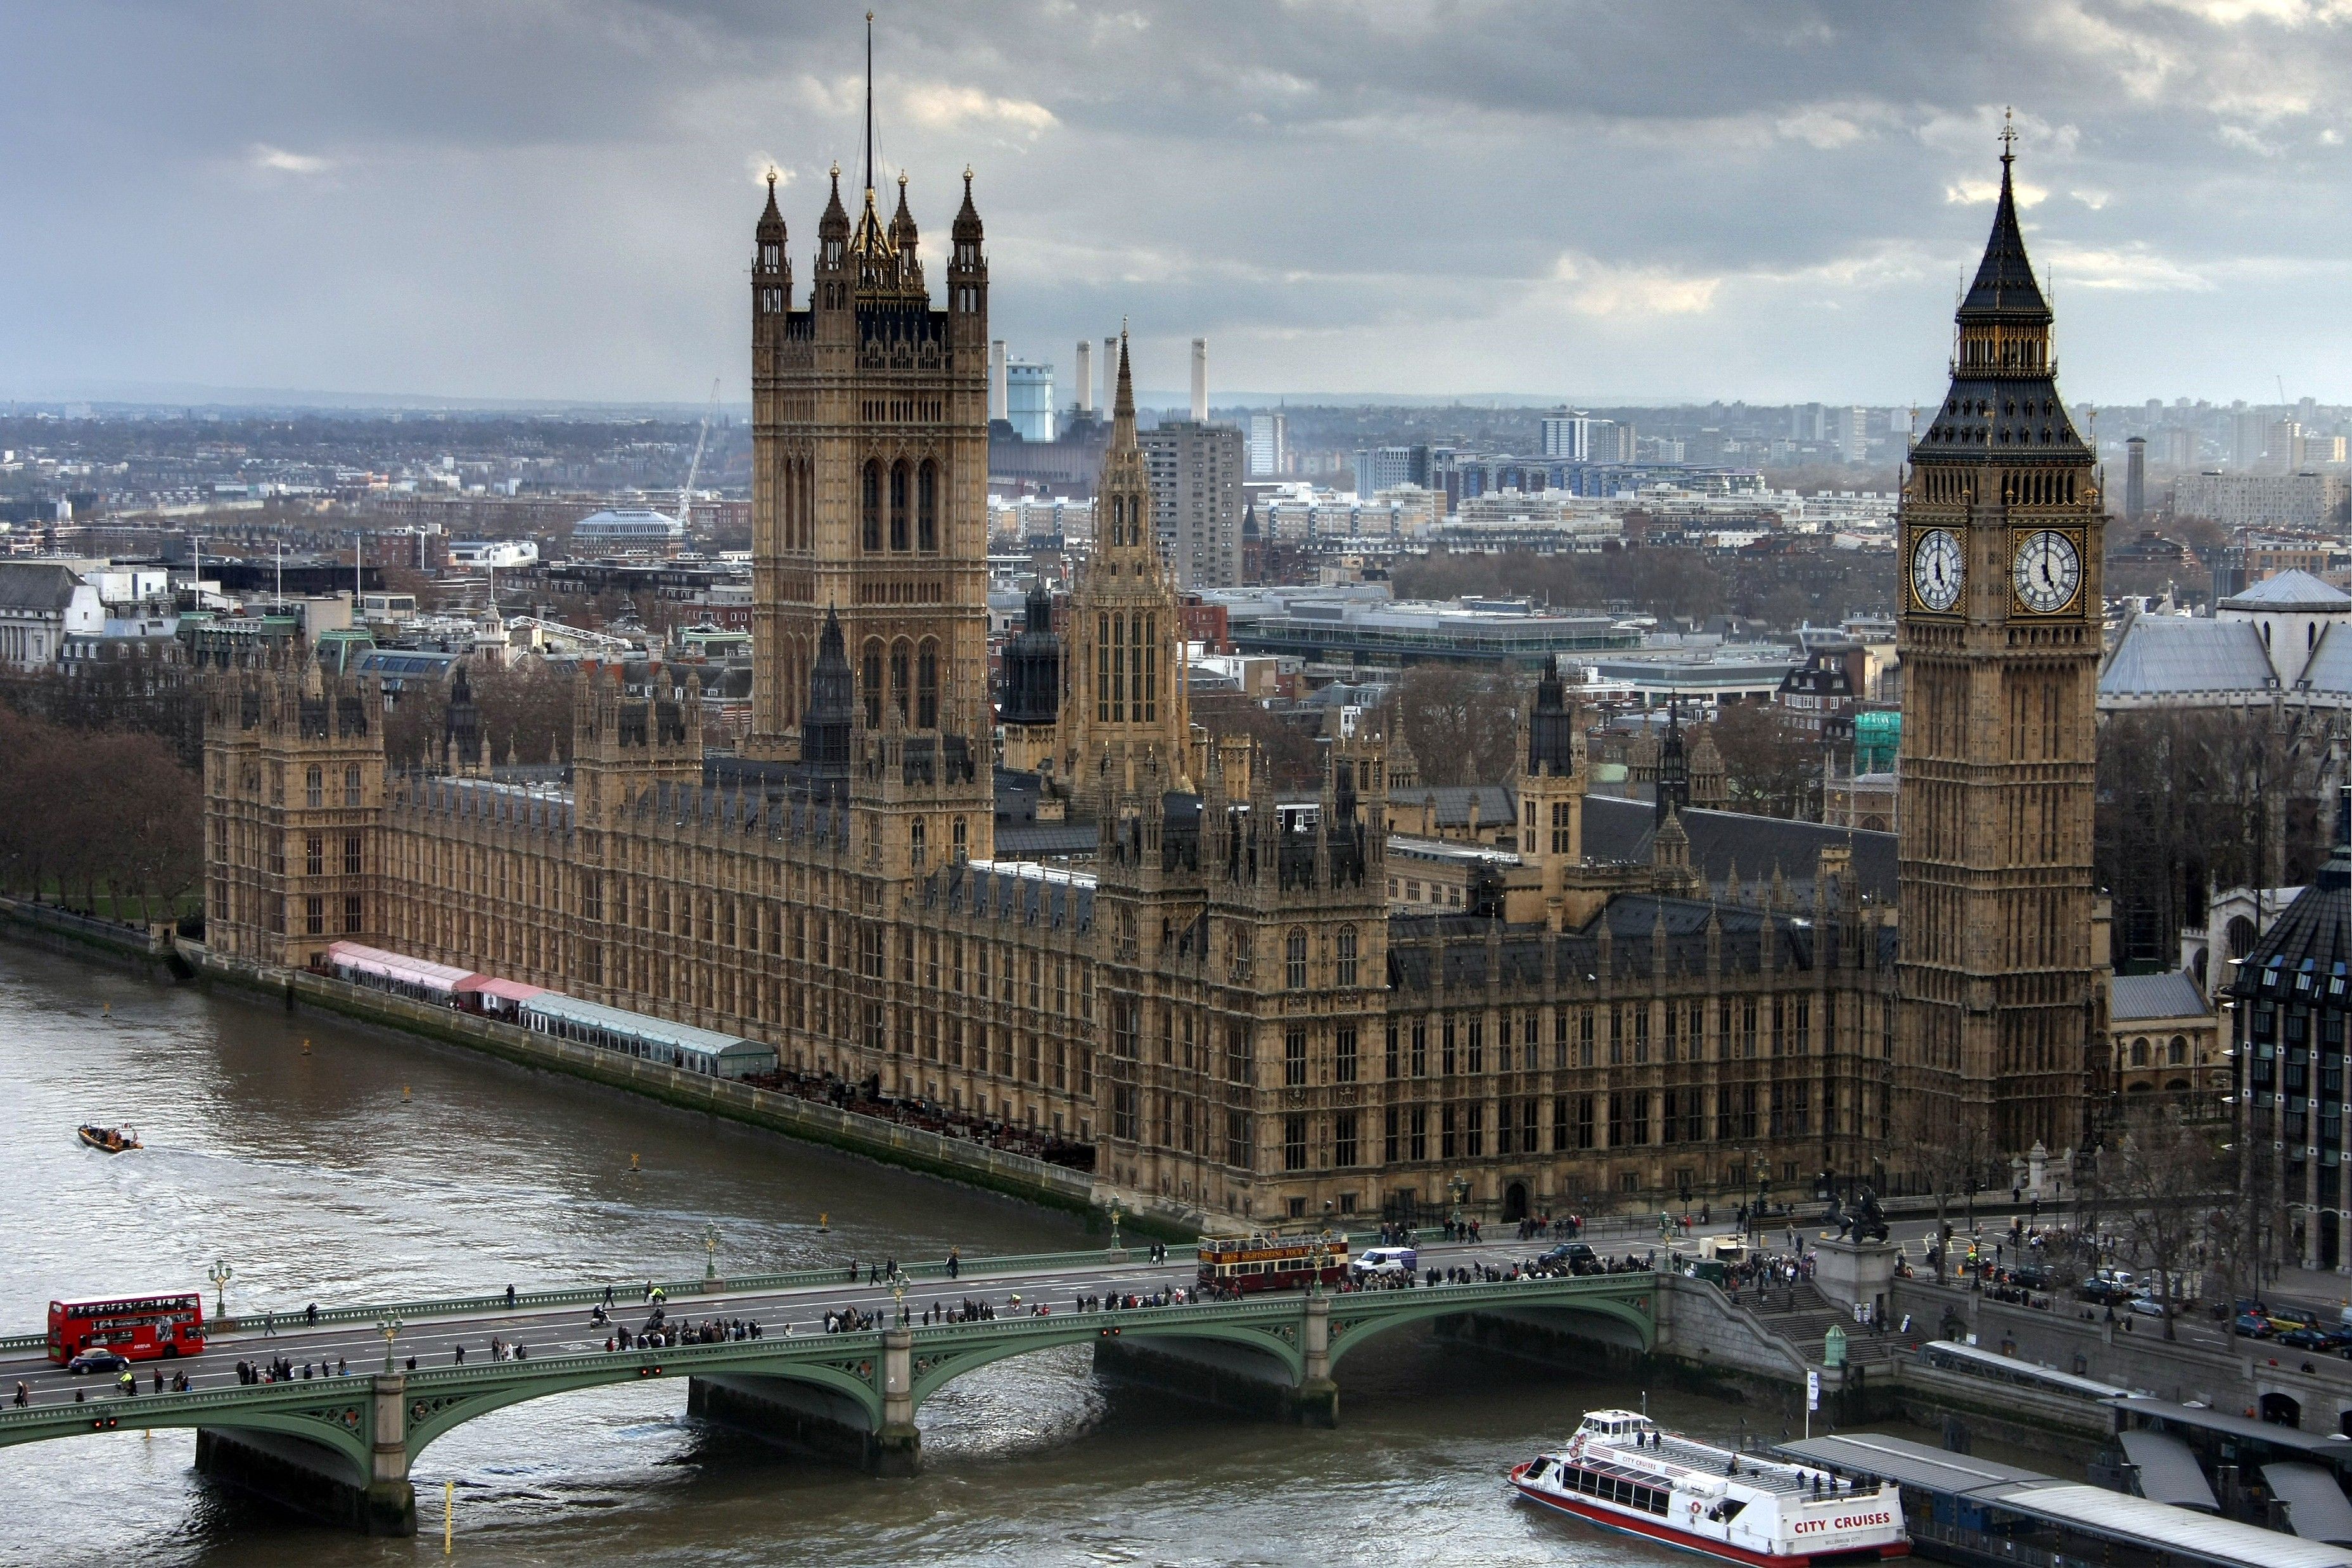 Palace of Westminster in London England Photo